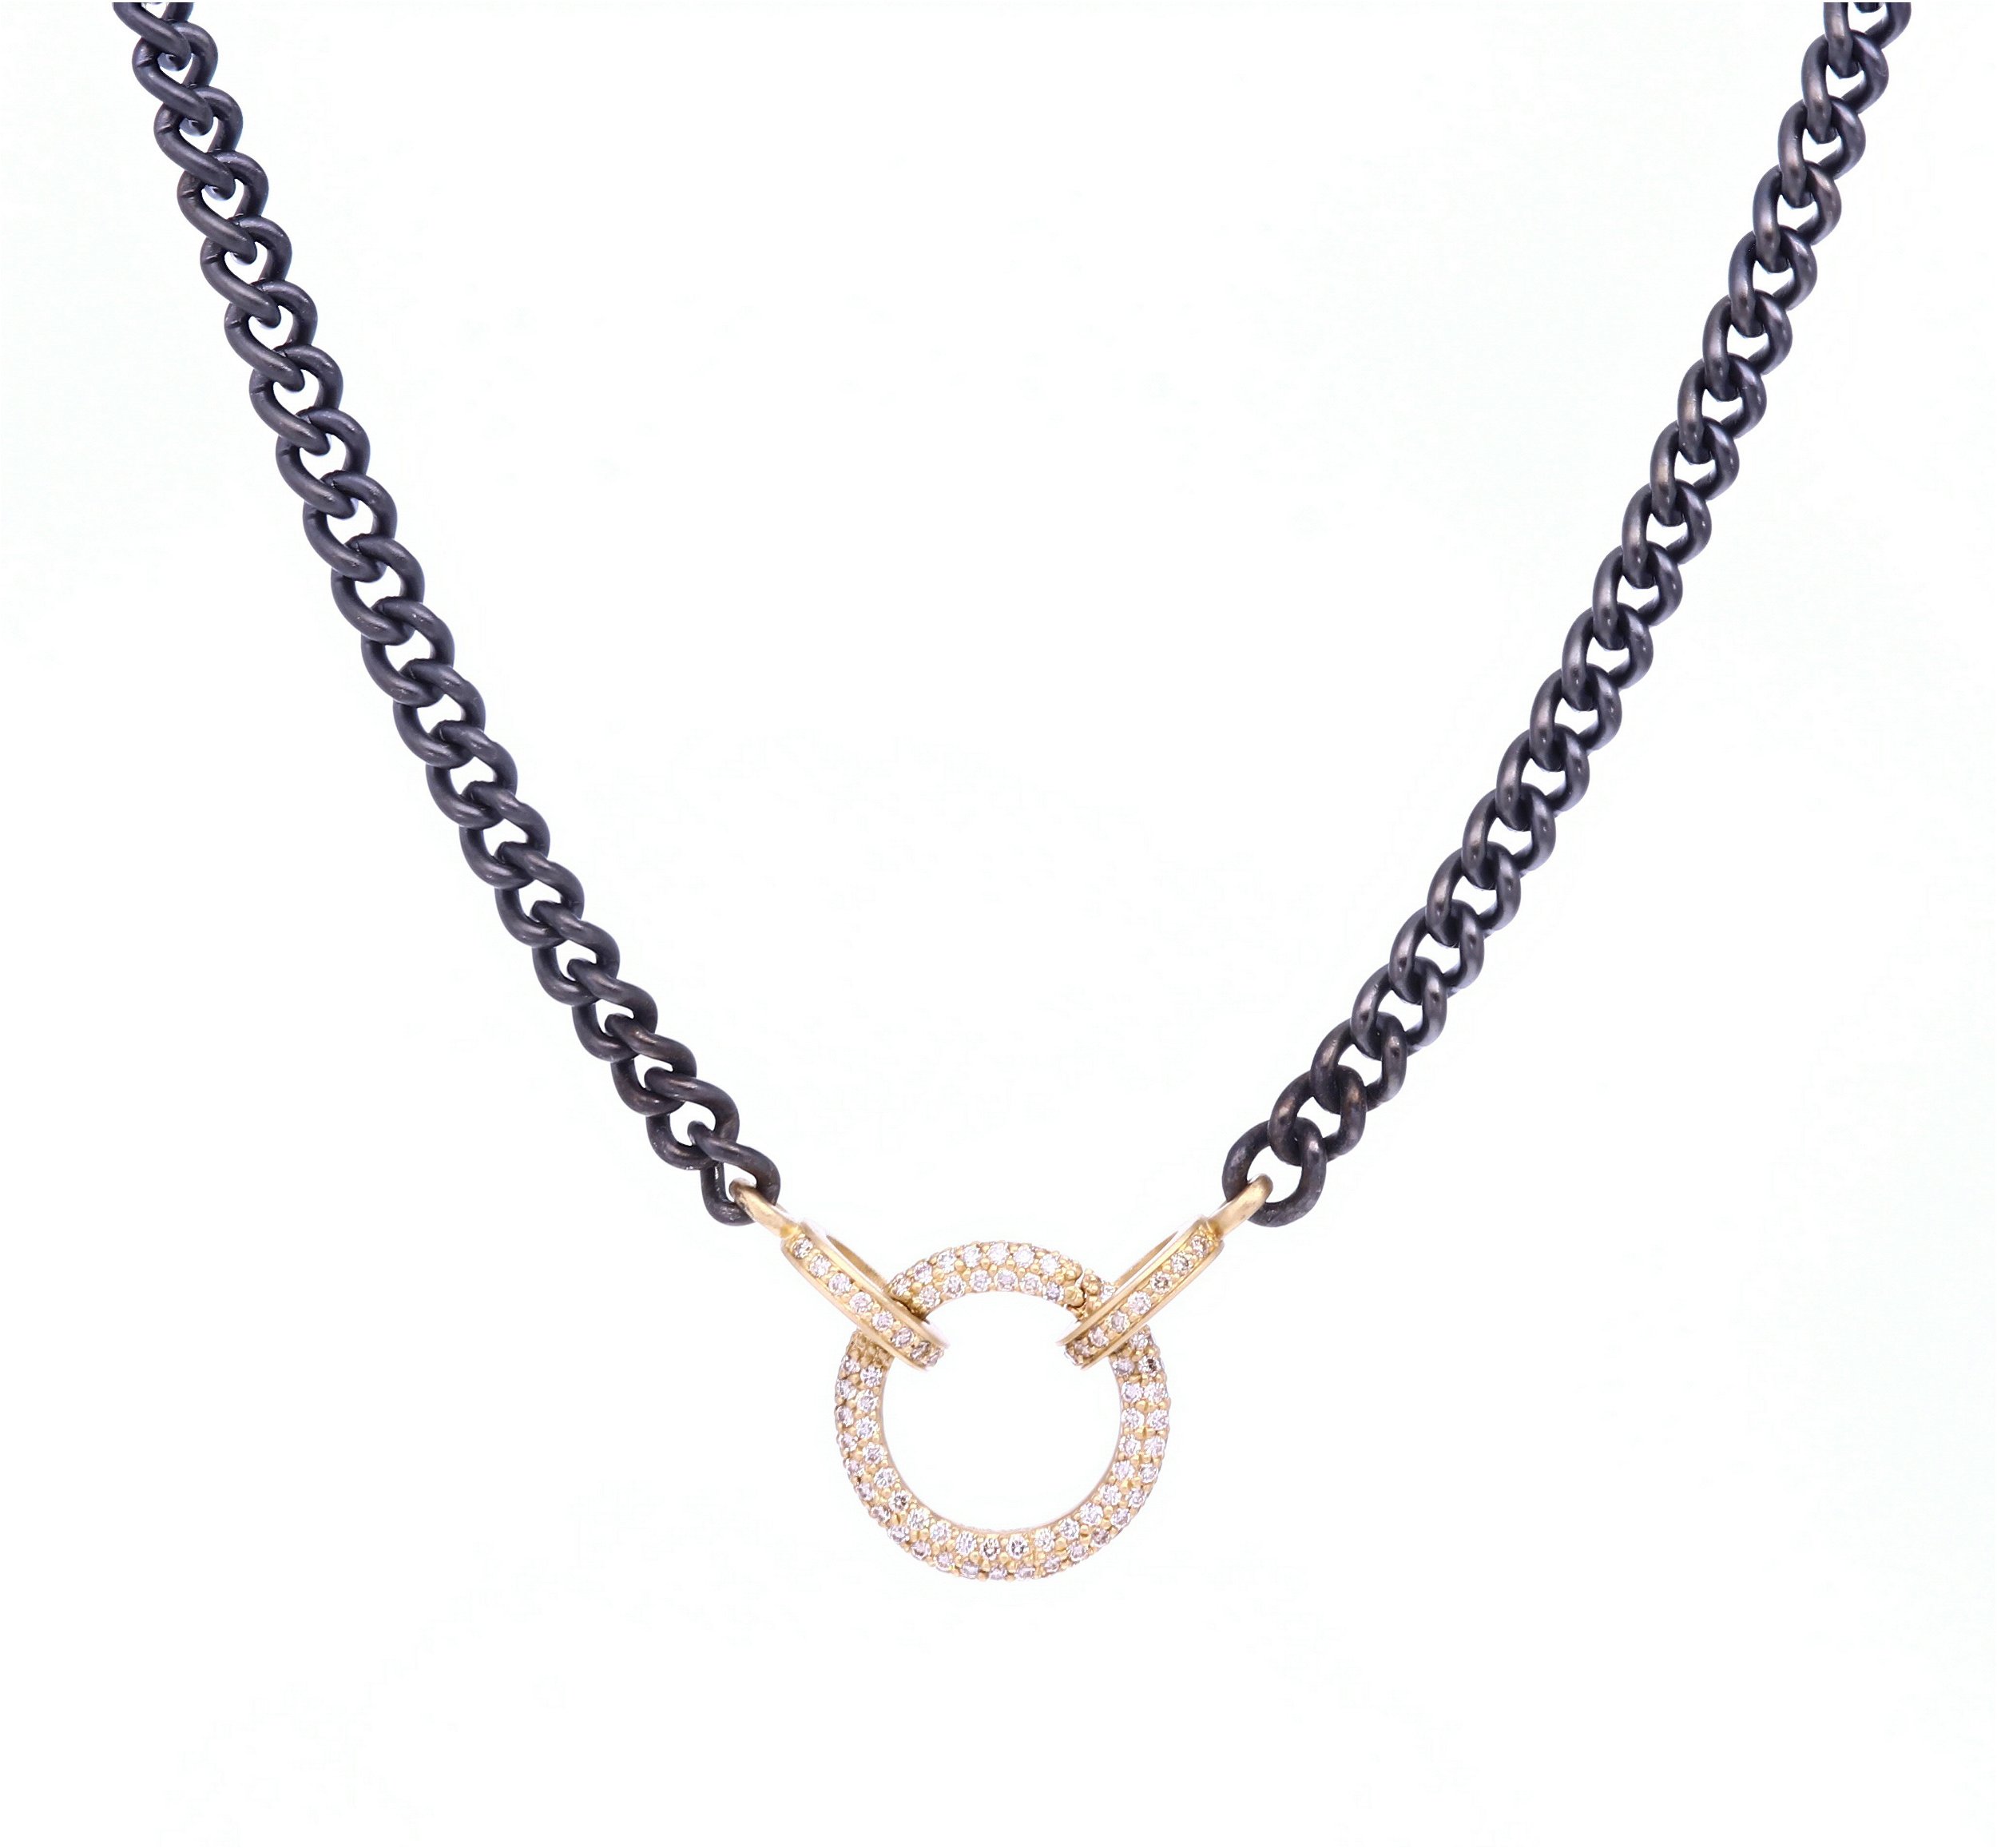 Classic Diamond Ring Display Chain with Open-able Ring